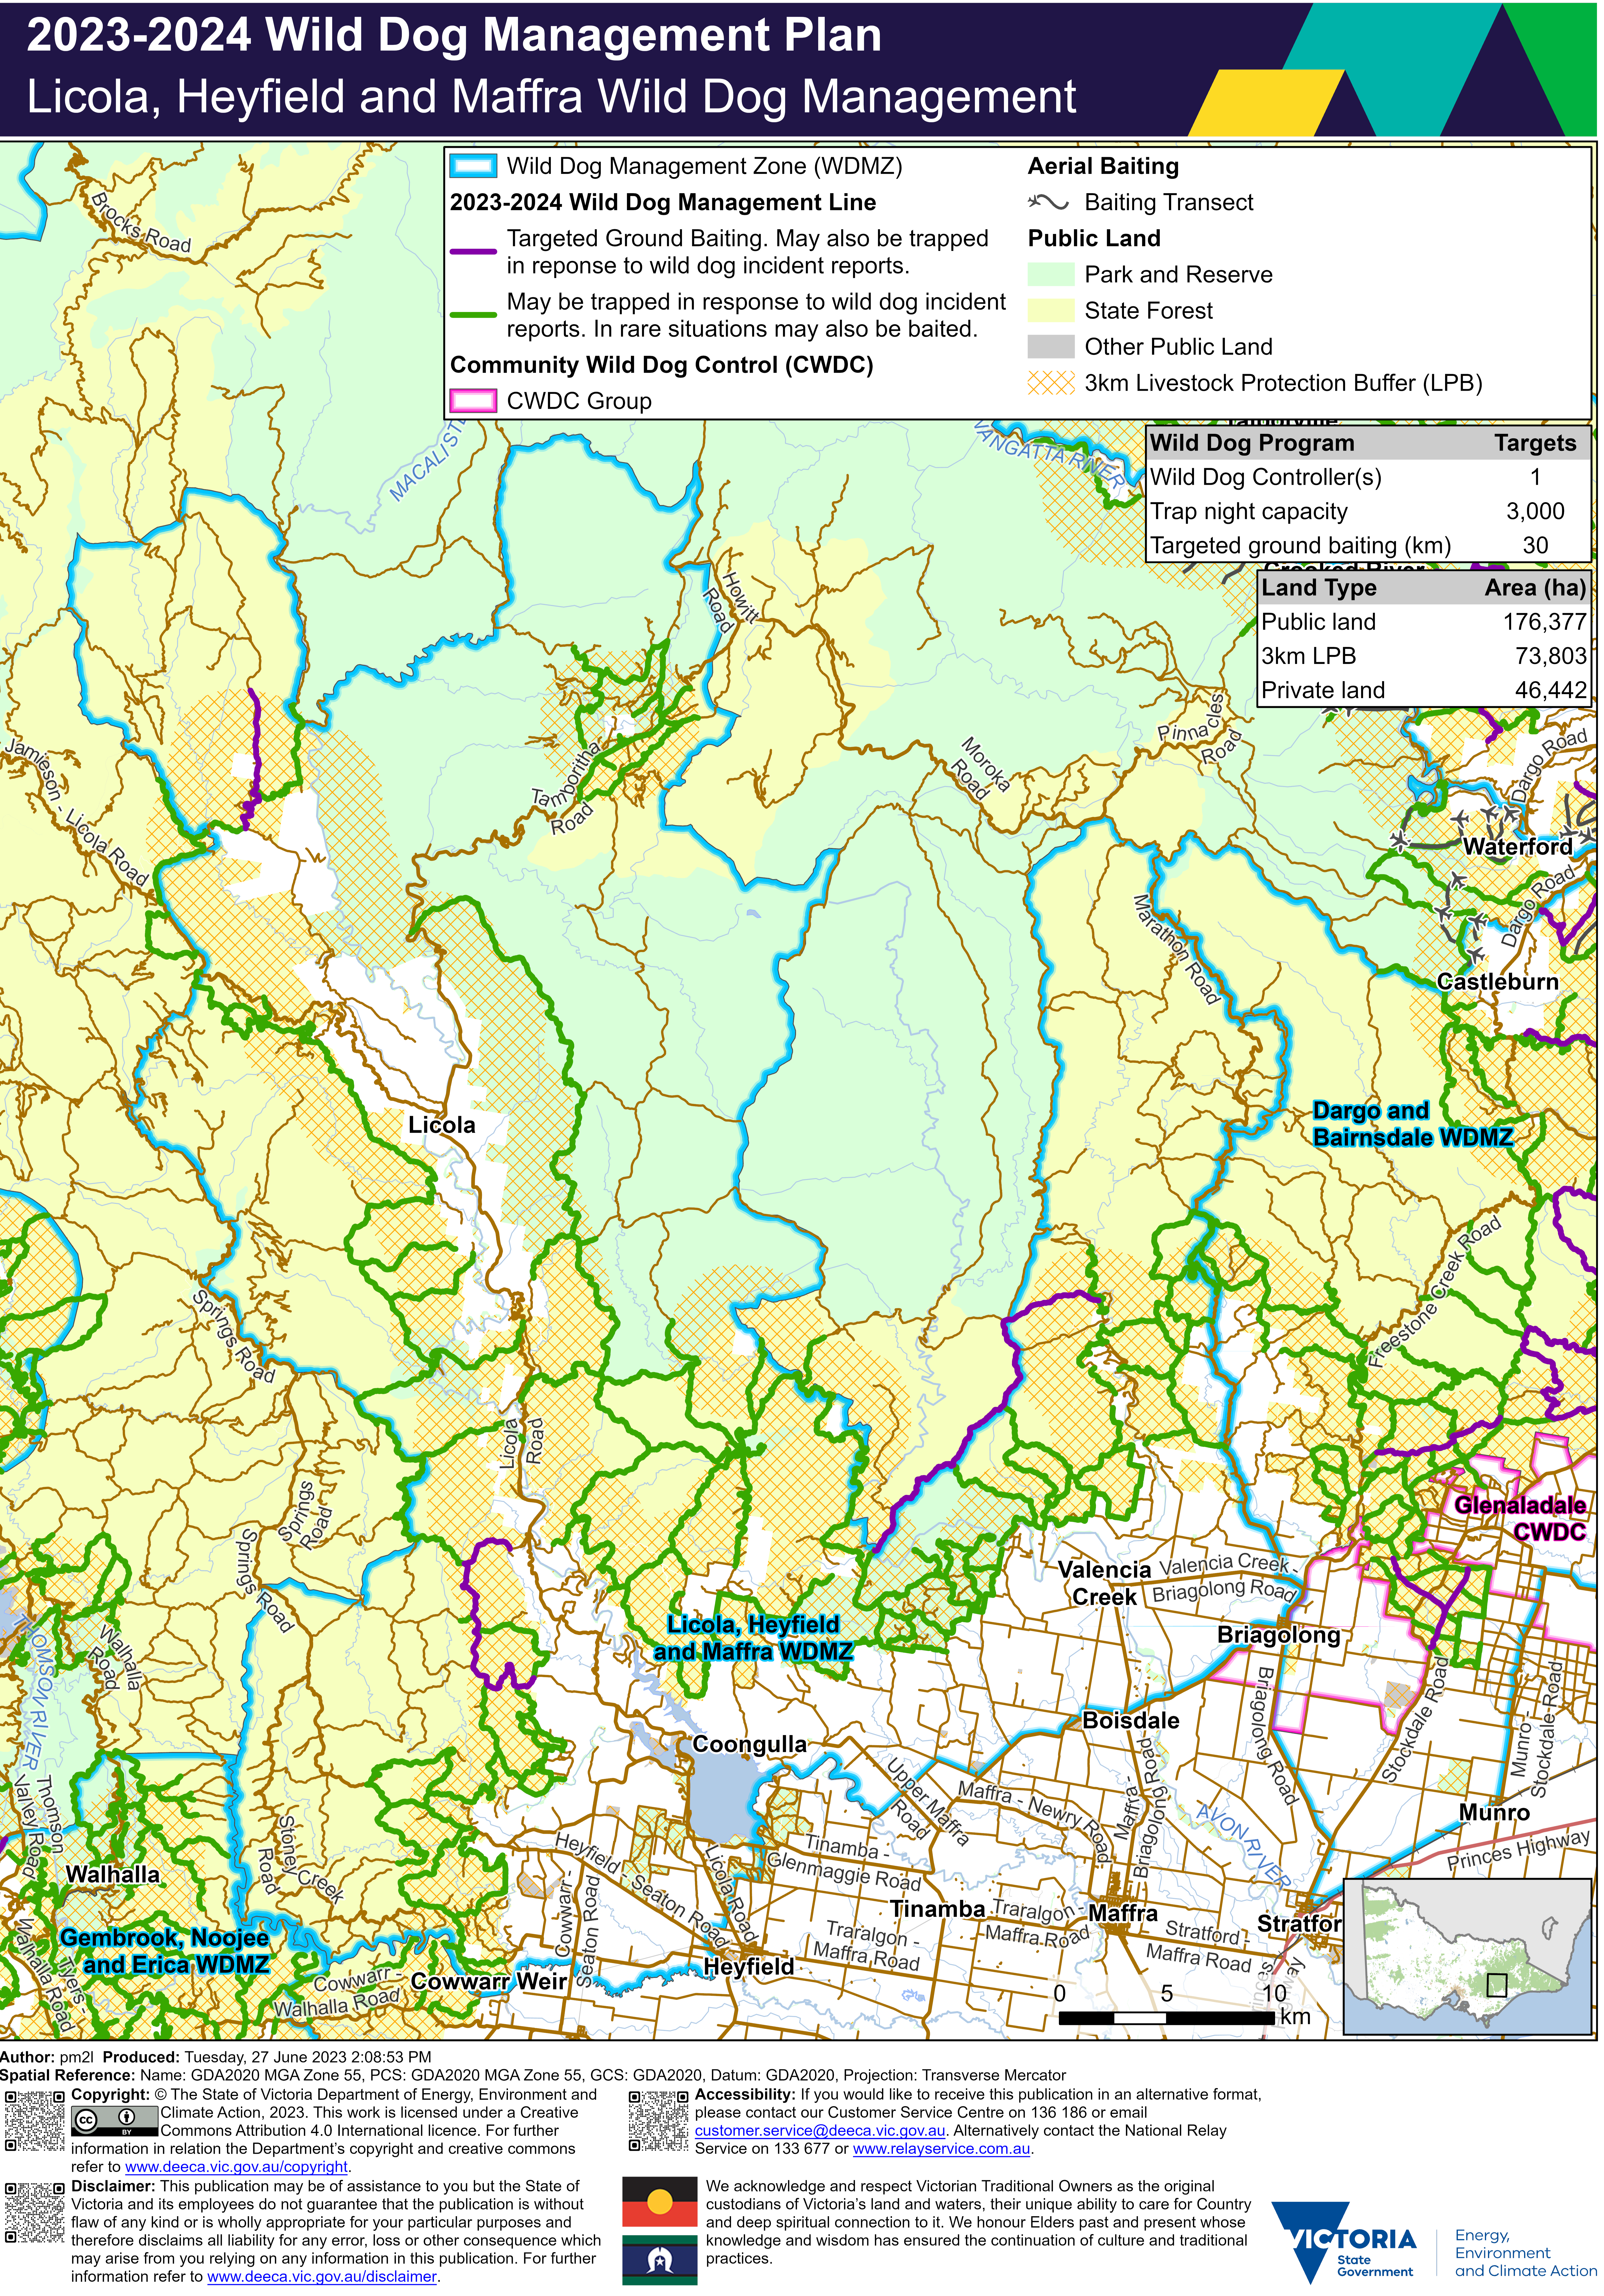 A detailed map of the Licola, Heyfield and Maffra regions showing the Licola, Heyfield and Maffra wild dog management zone along with Trapping and Priority 1 and Priority 2 ground baiting transects. Further information below image.